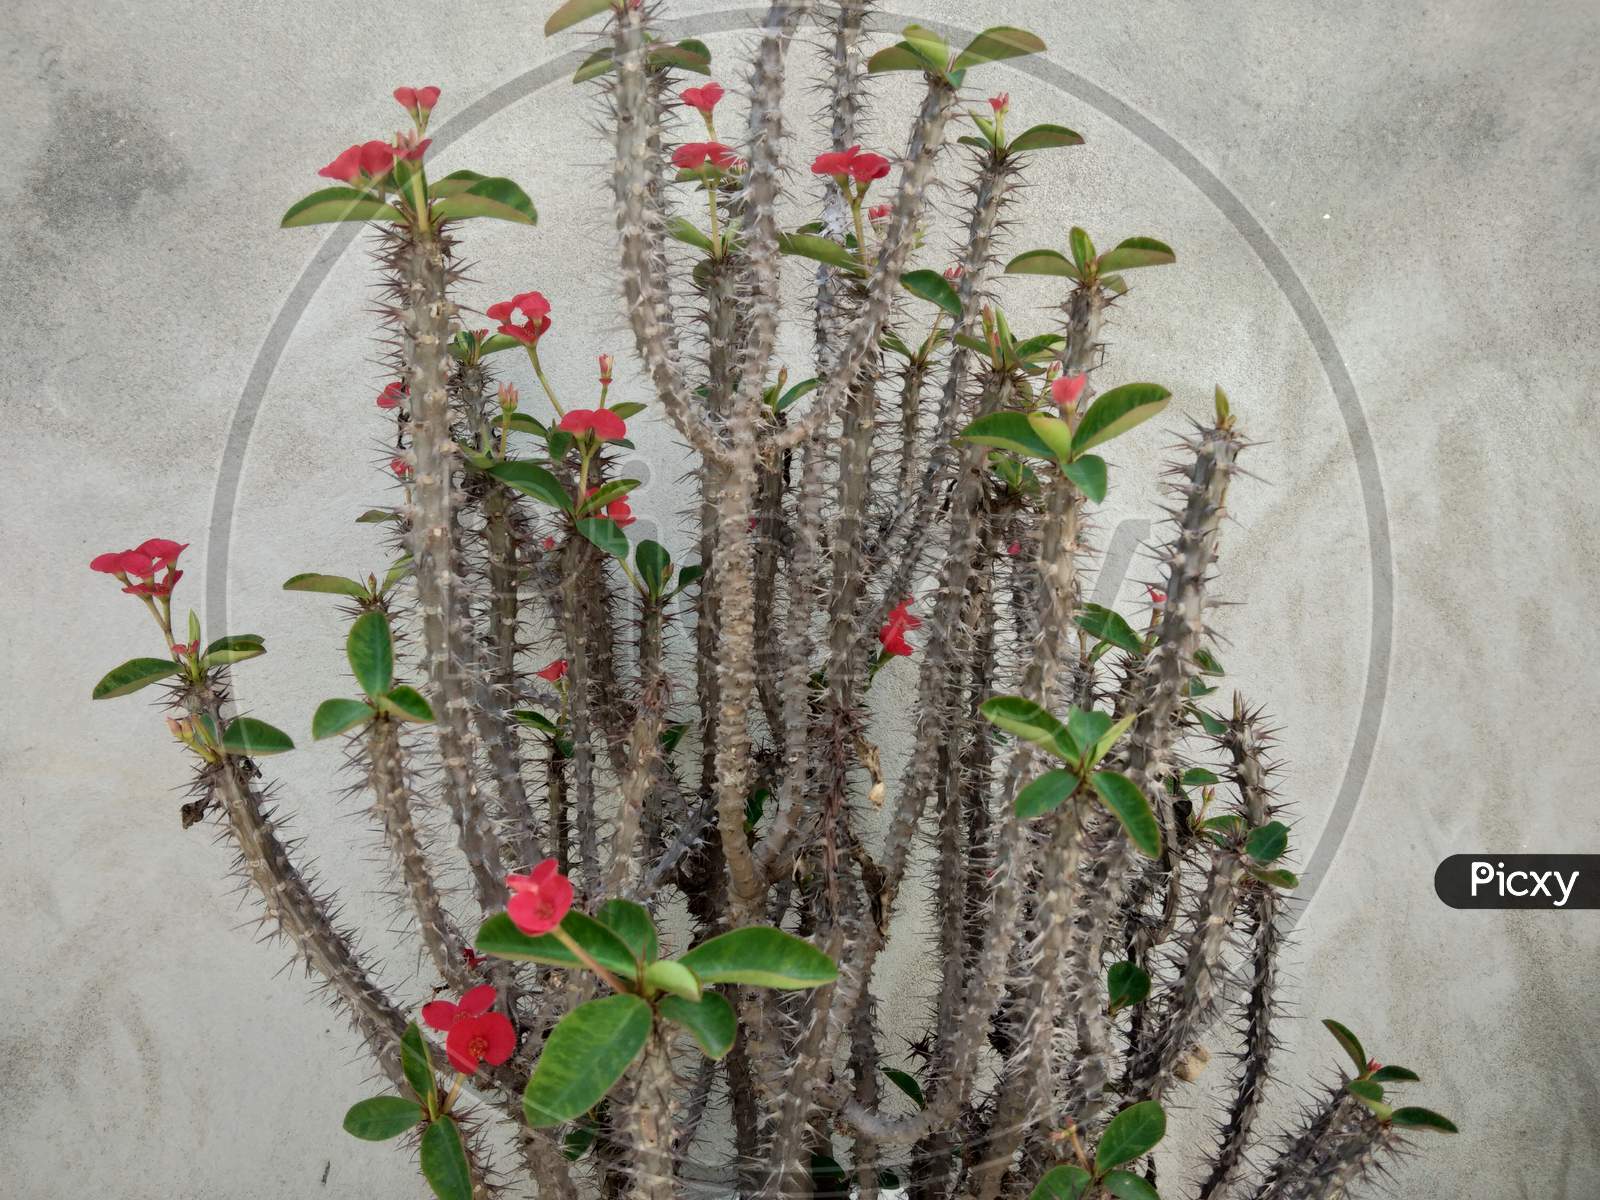 A thorny plant with red flowers on it, in spring season